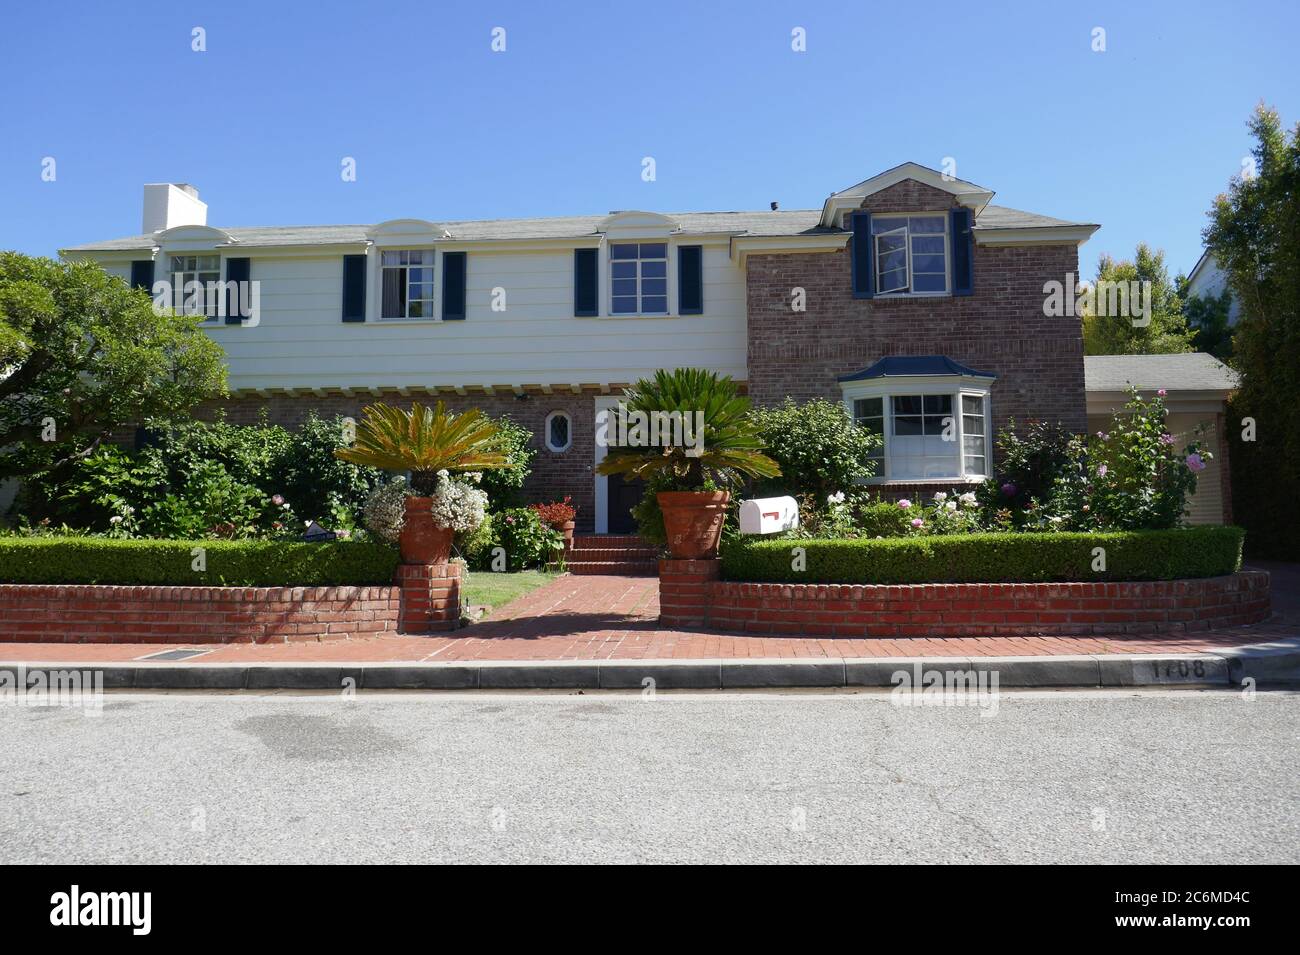 Beverly Hills, California, USA 10th July 2020 A general view of atmosphere of of Hedda Hopper's former home at 1708 Tropical Avenue on July 10, 2020 in Beverly Hills, California, USA. Photo by Barry King/Alamy Stock Photo Stock Photo